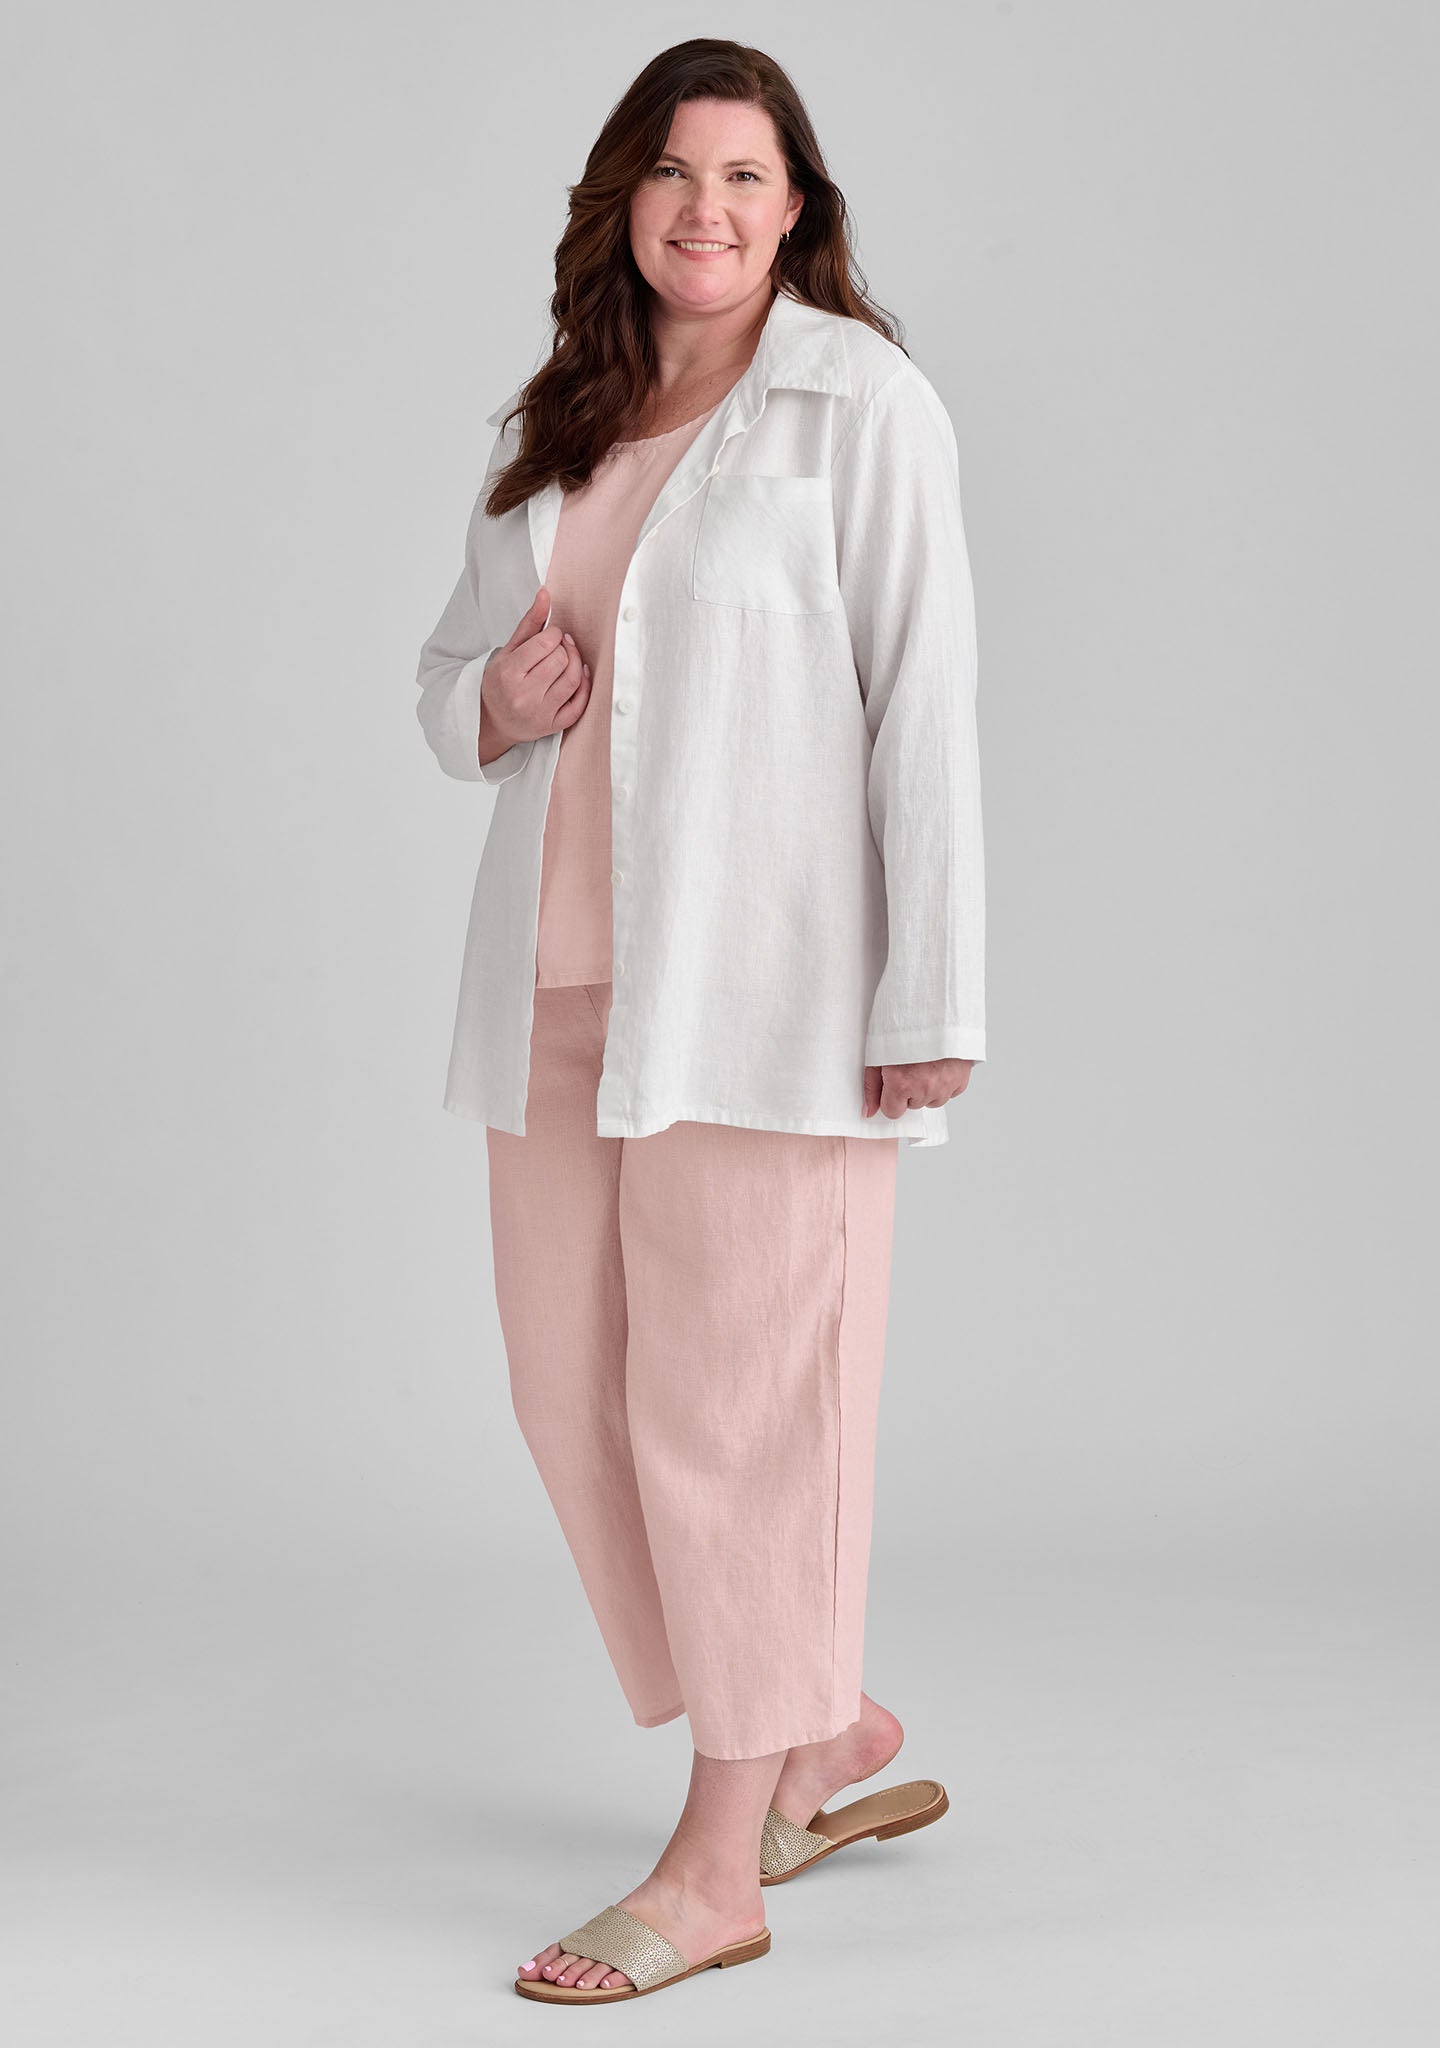 FLAX linen shirt in white with linen tank in pink and linen pants in pink